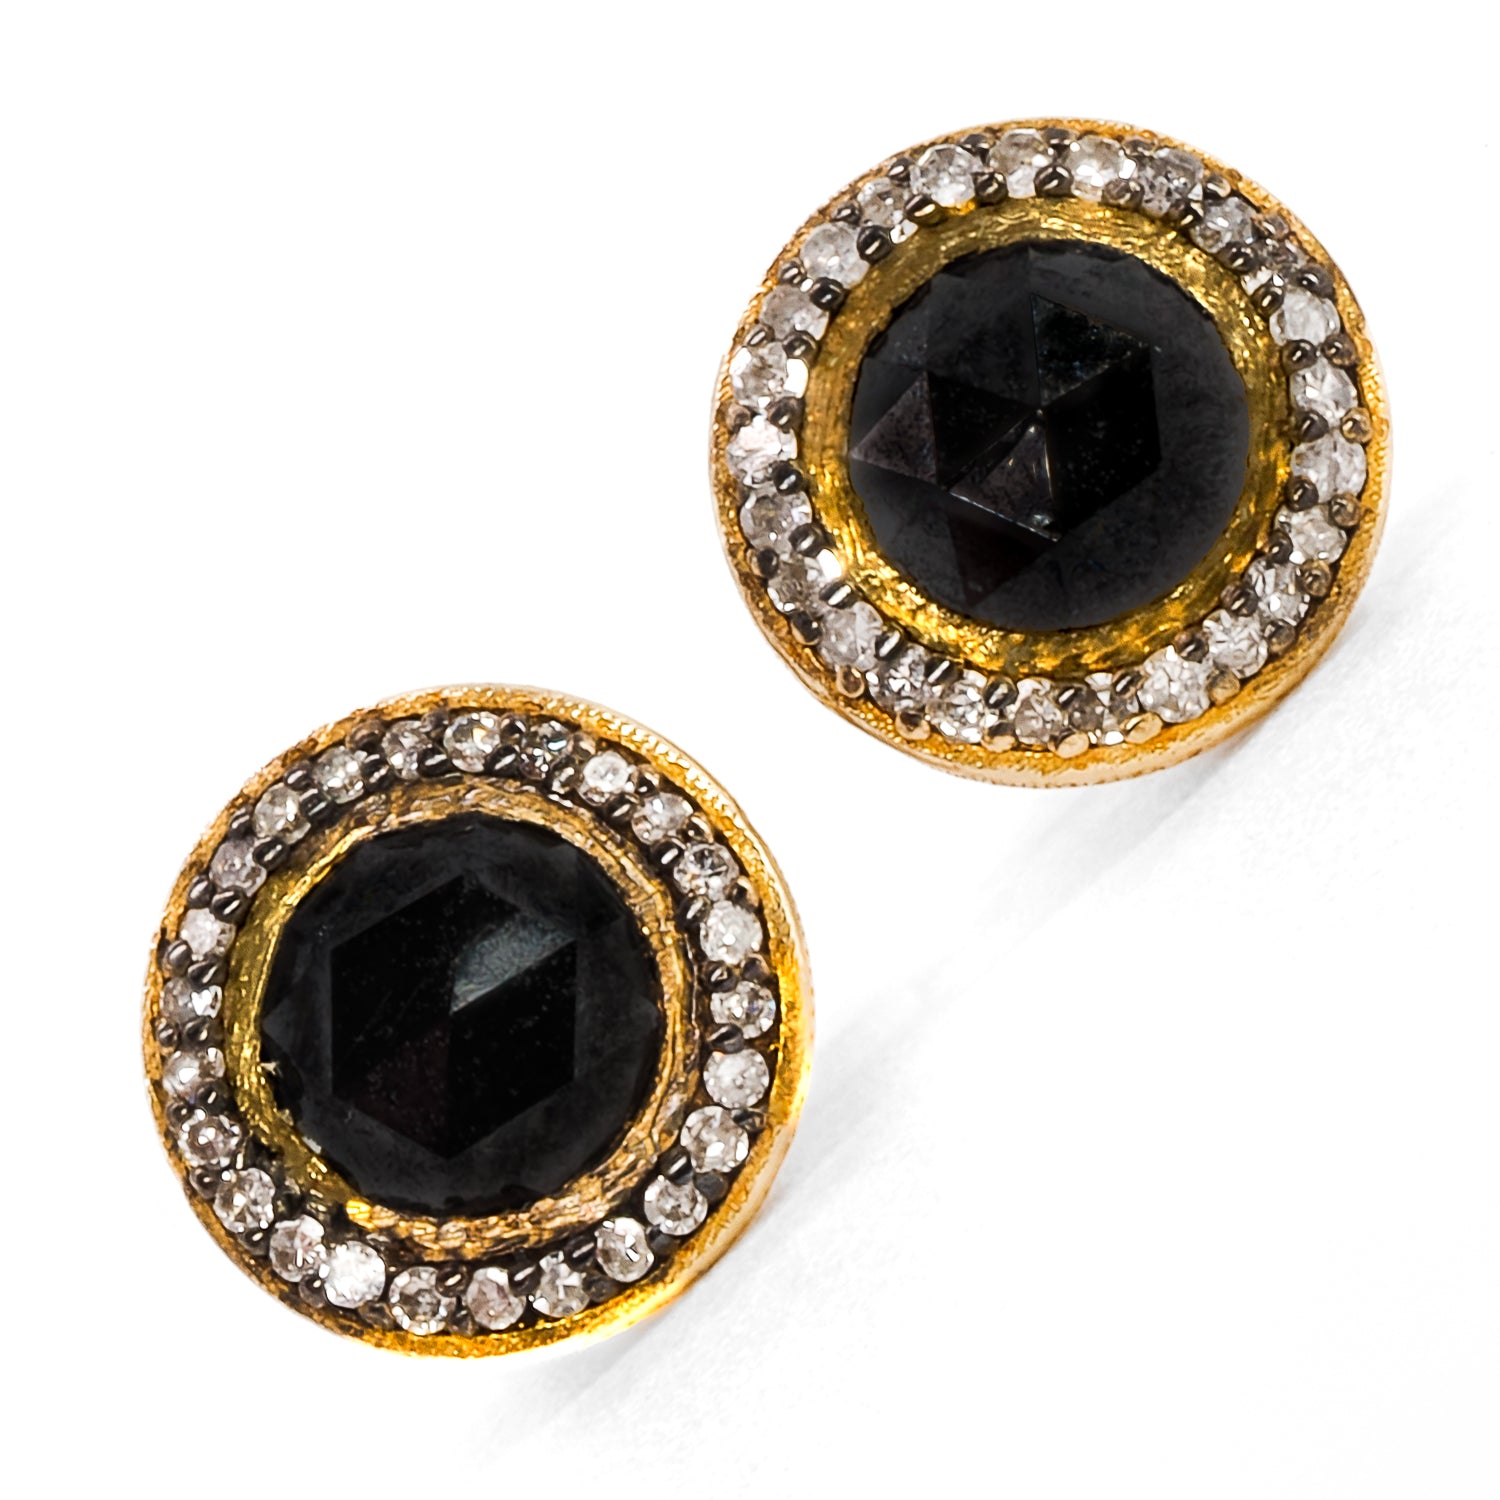 Complete your look with the Mini Black Rose Cut Stud Earrings, as they add a touch of glamour and refinement.